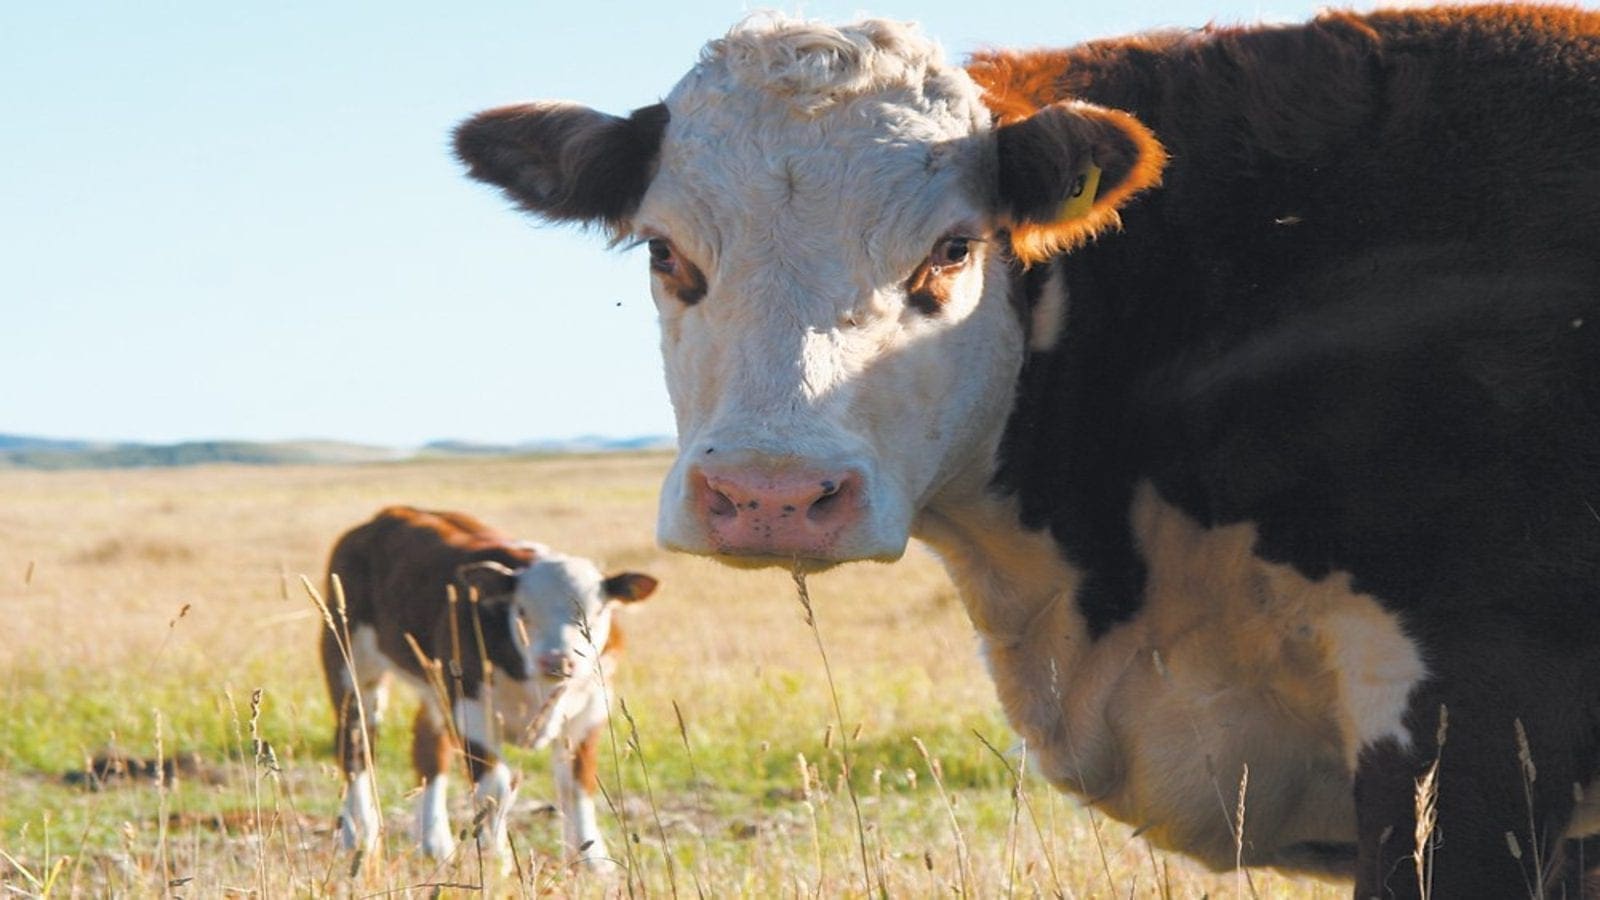 Cargill forms partnership to reduce methane emissions in beef production